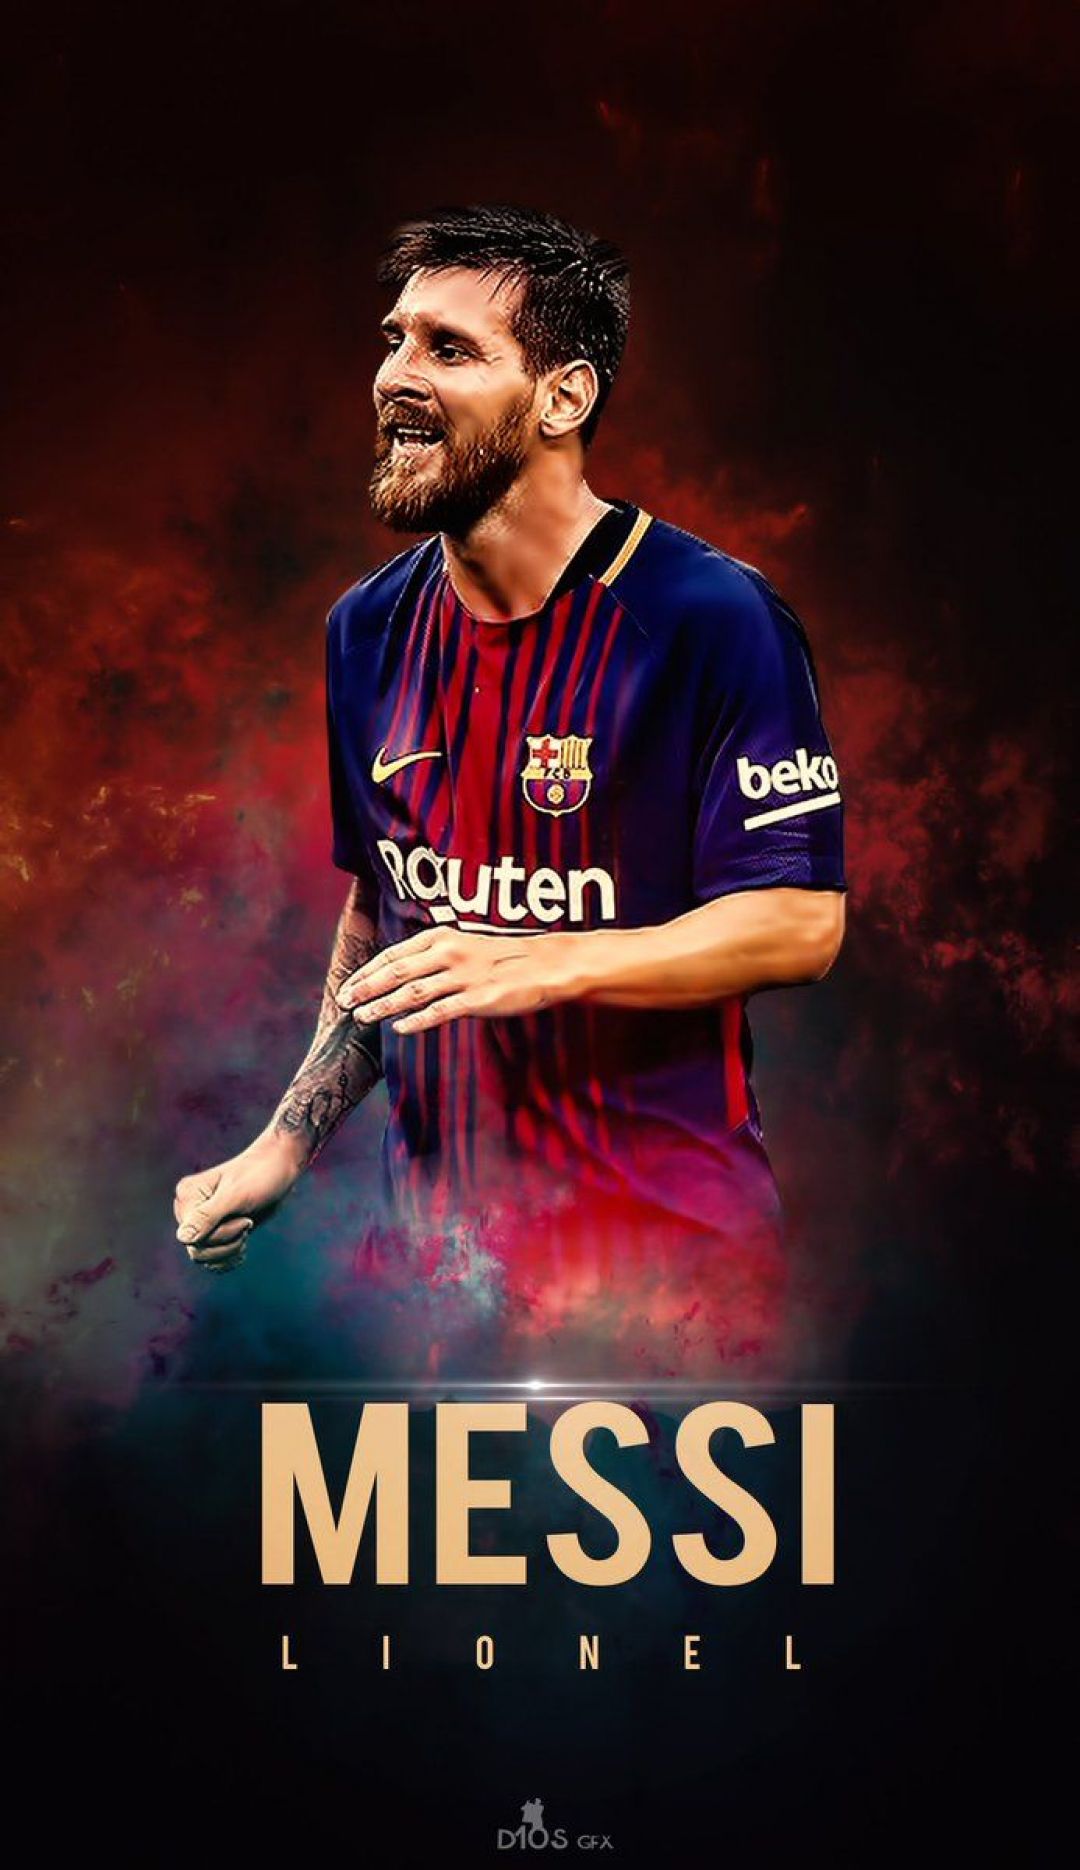 ✓[80+] Lionel Messi 2018 Wallpaper - Android / iPhone HD Wallpaper  Background Download (png / jpg) (2023)